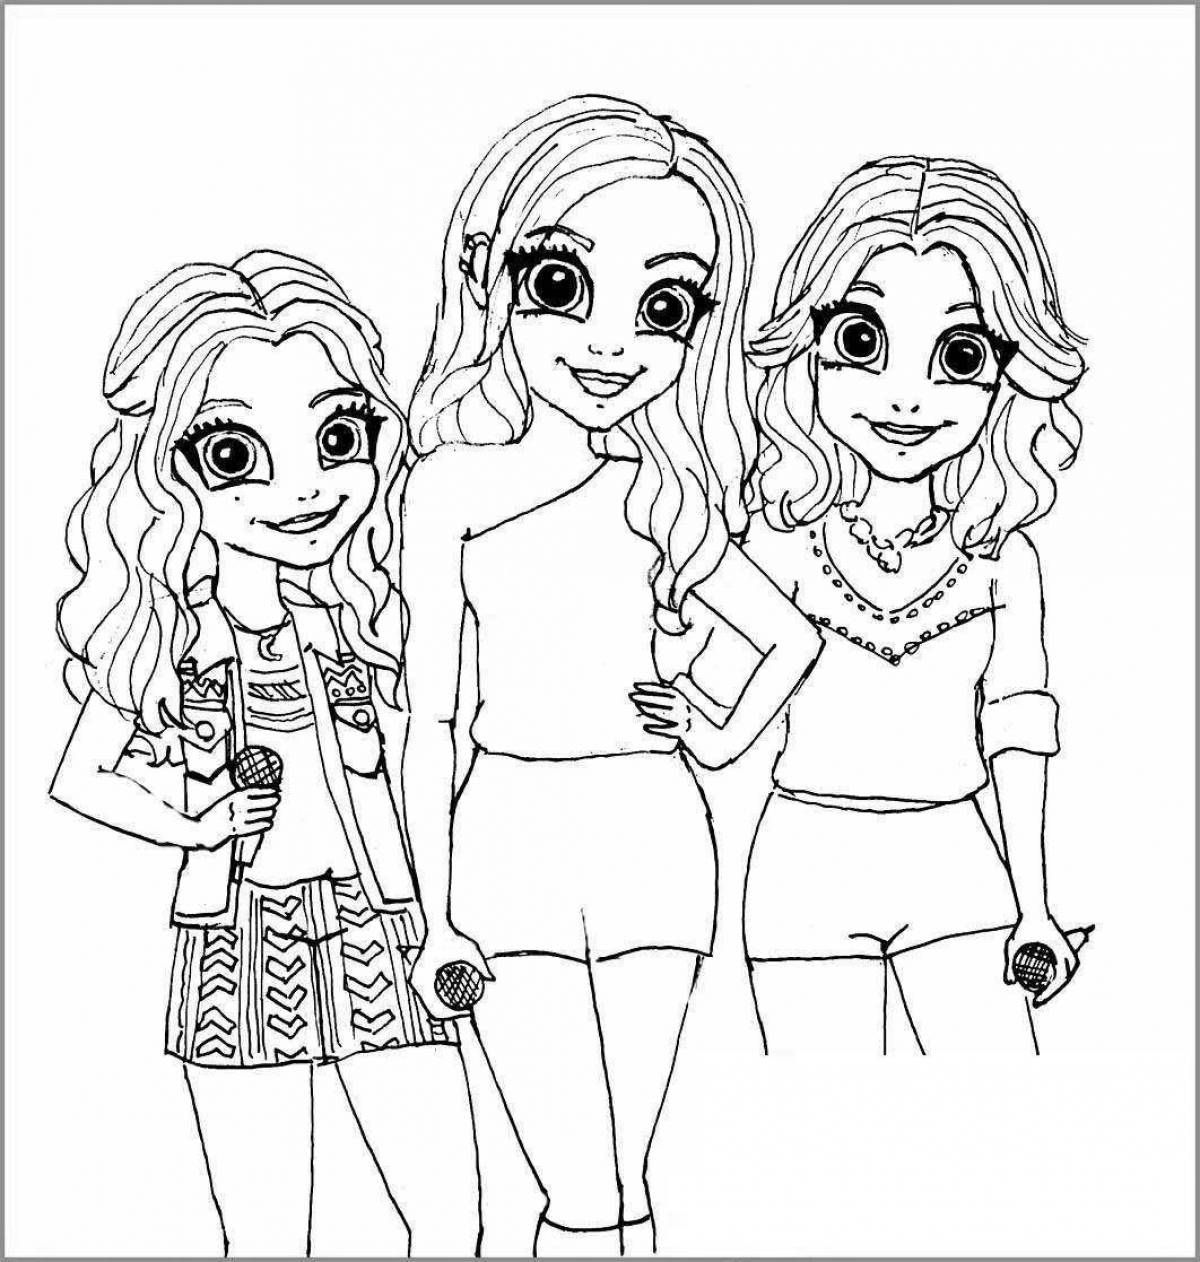 Adorable coloring book for girl friends